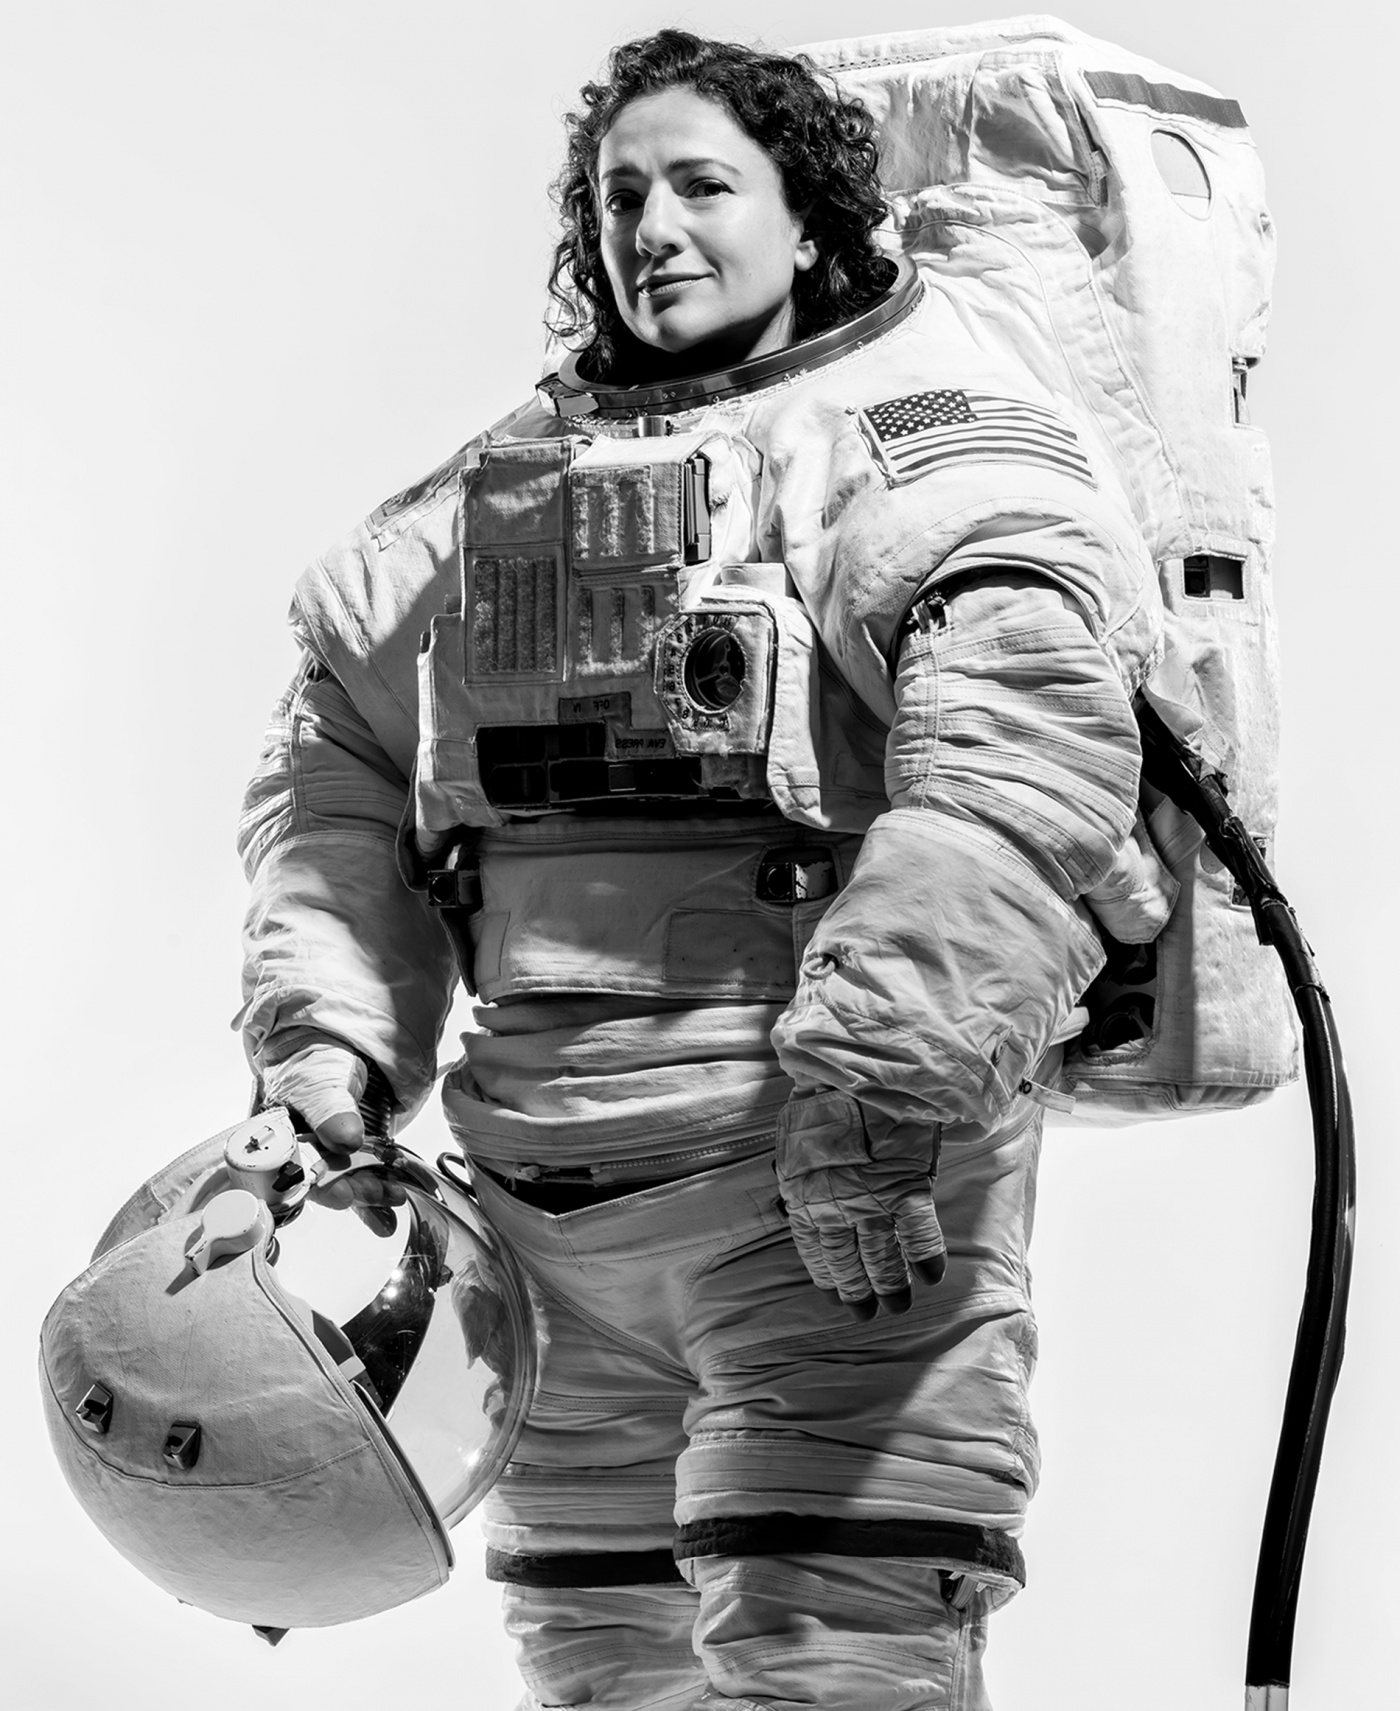 Jessica Meir ’99 poses in her spacesuit